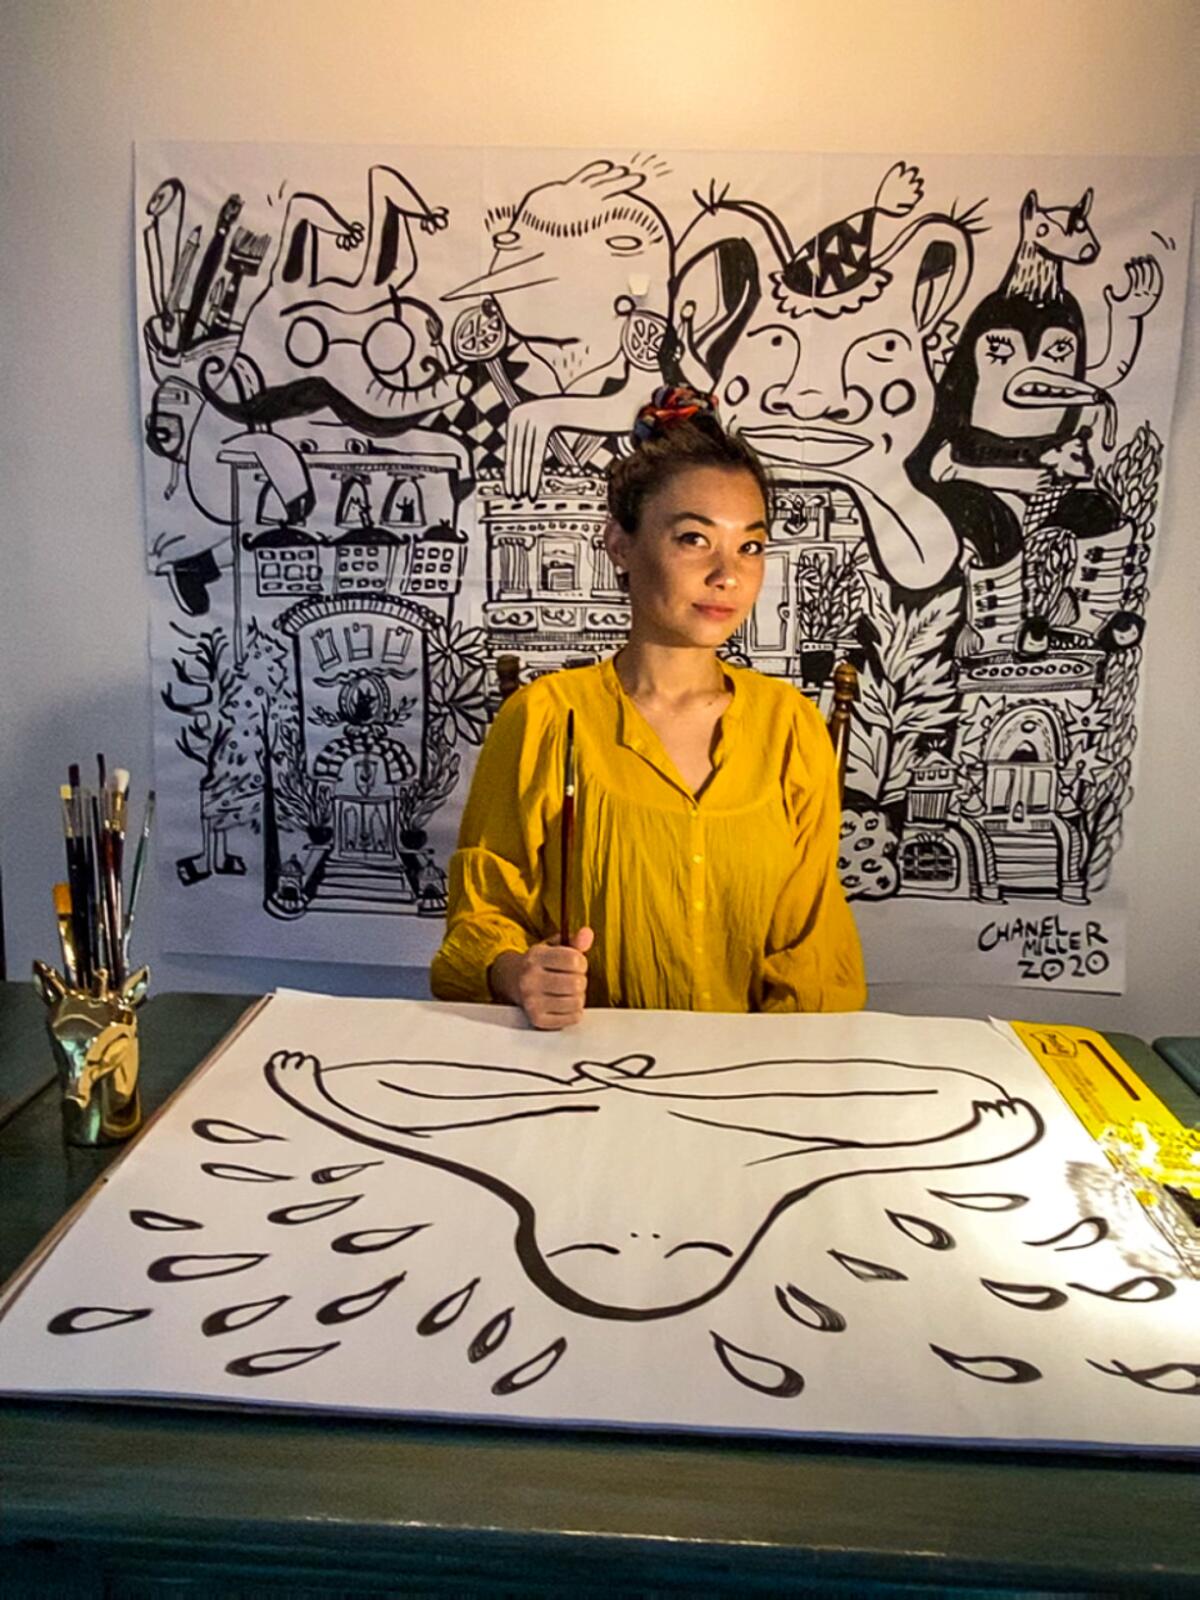 Chanel Miller sits before a large wall drawing in her New York apartment